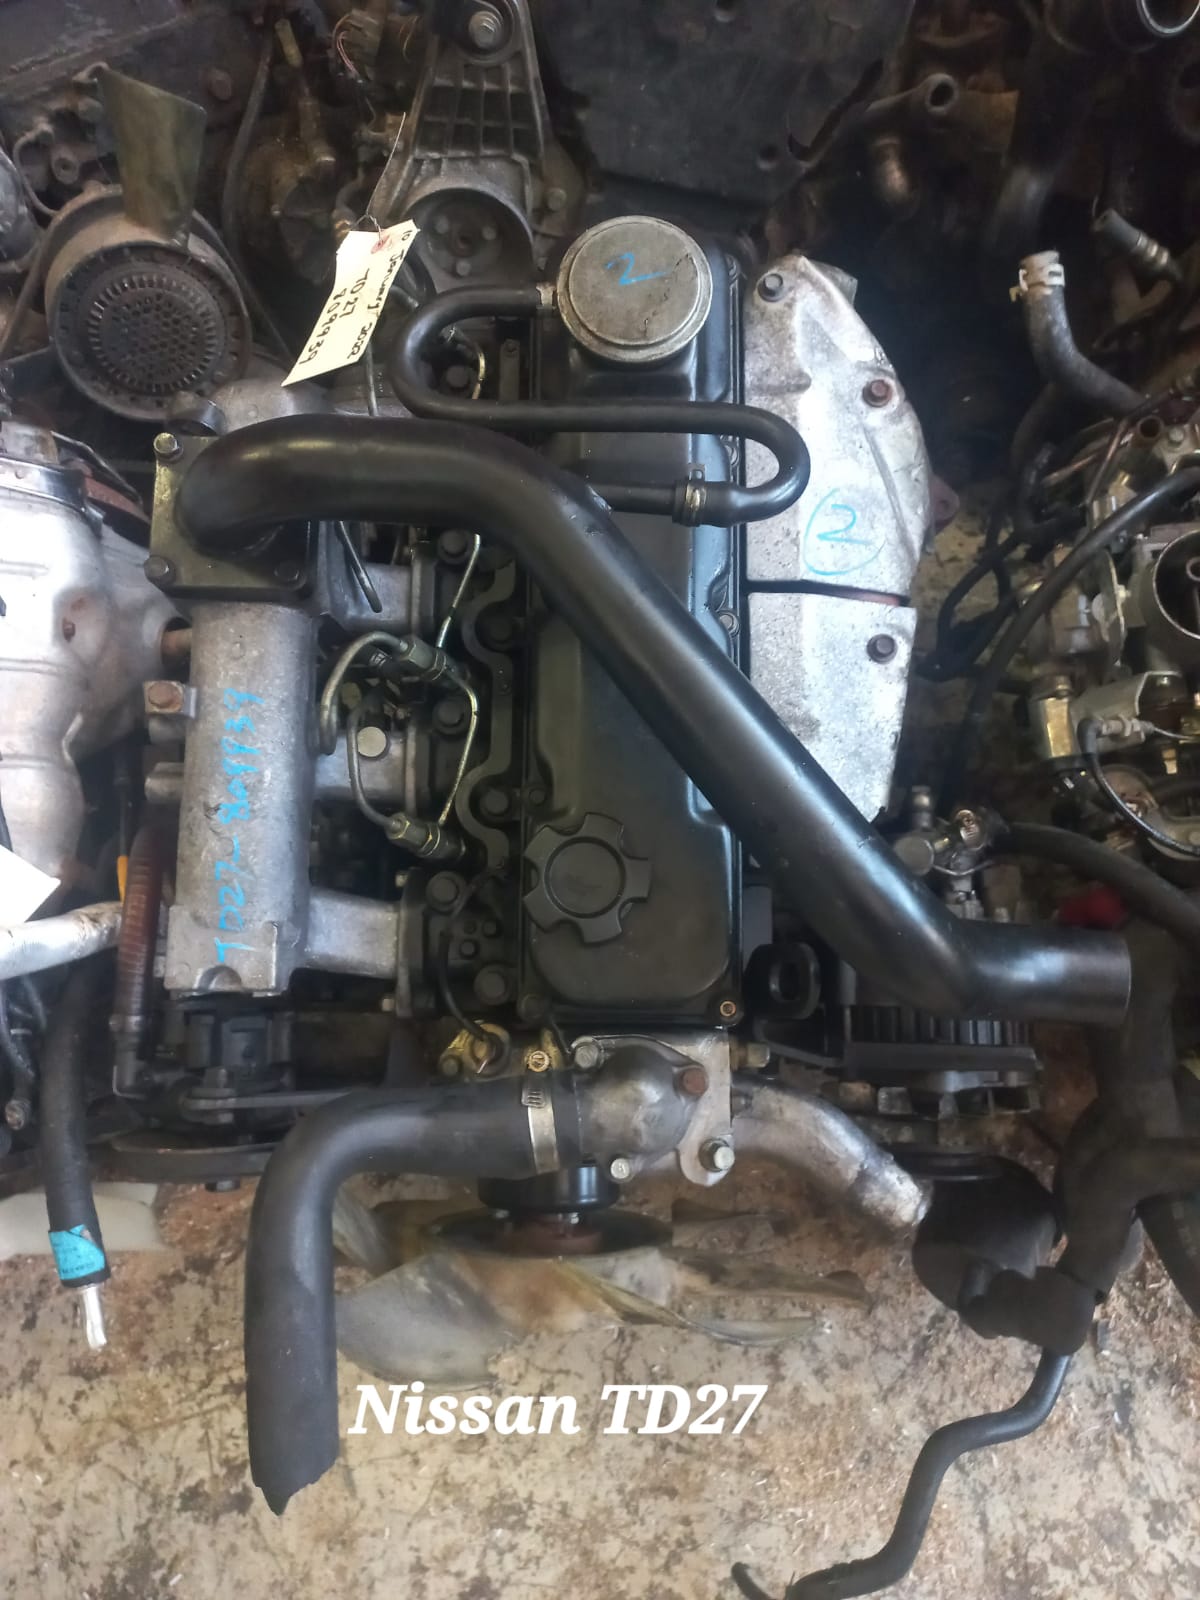 NISSAN TD27 NON TURBO ENGINE AVAILABLE